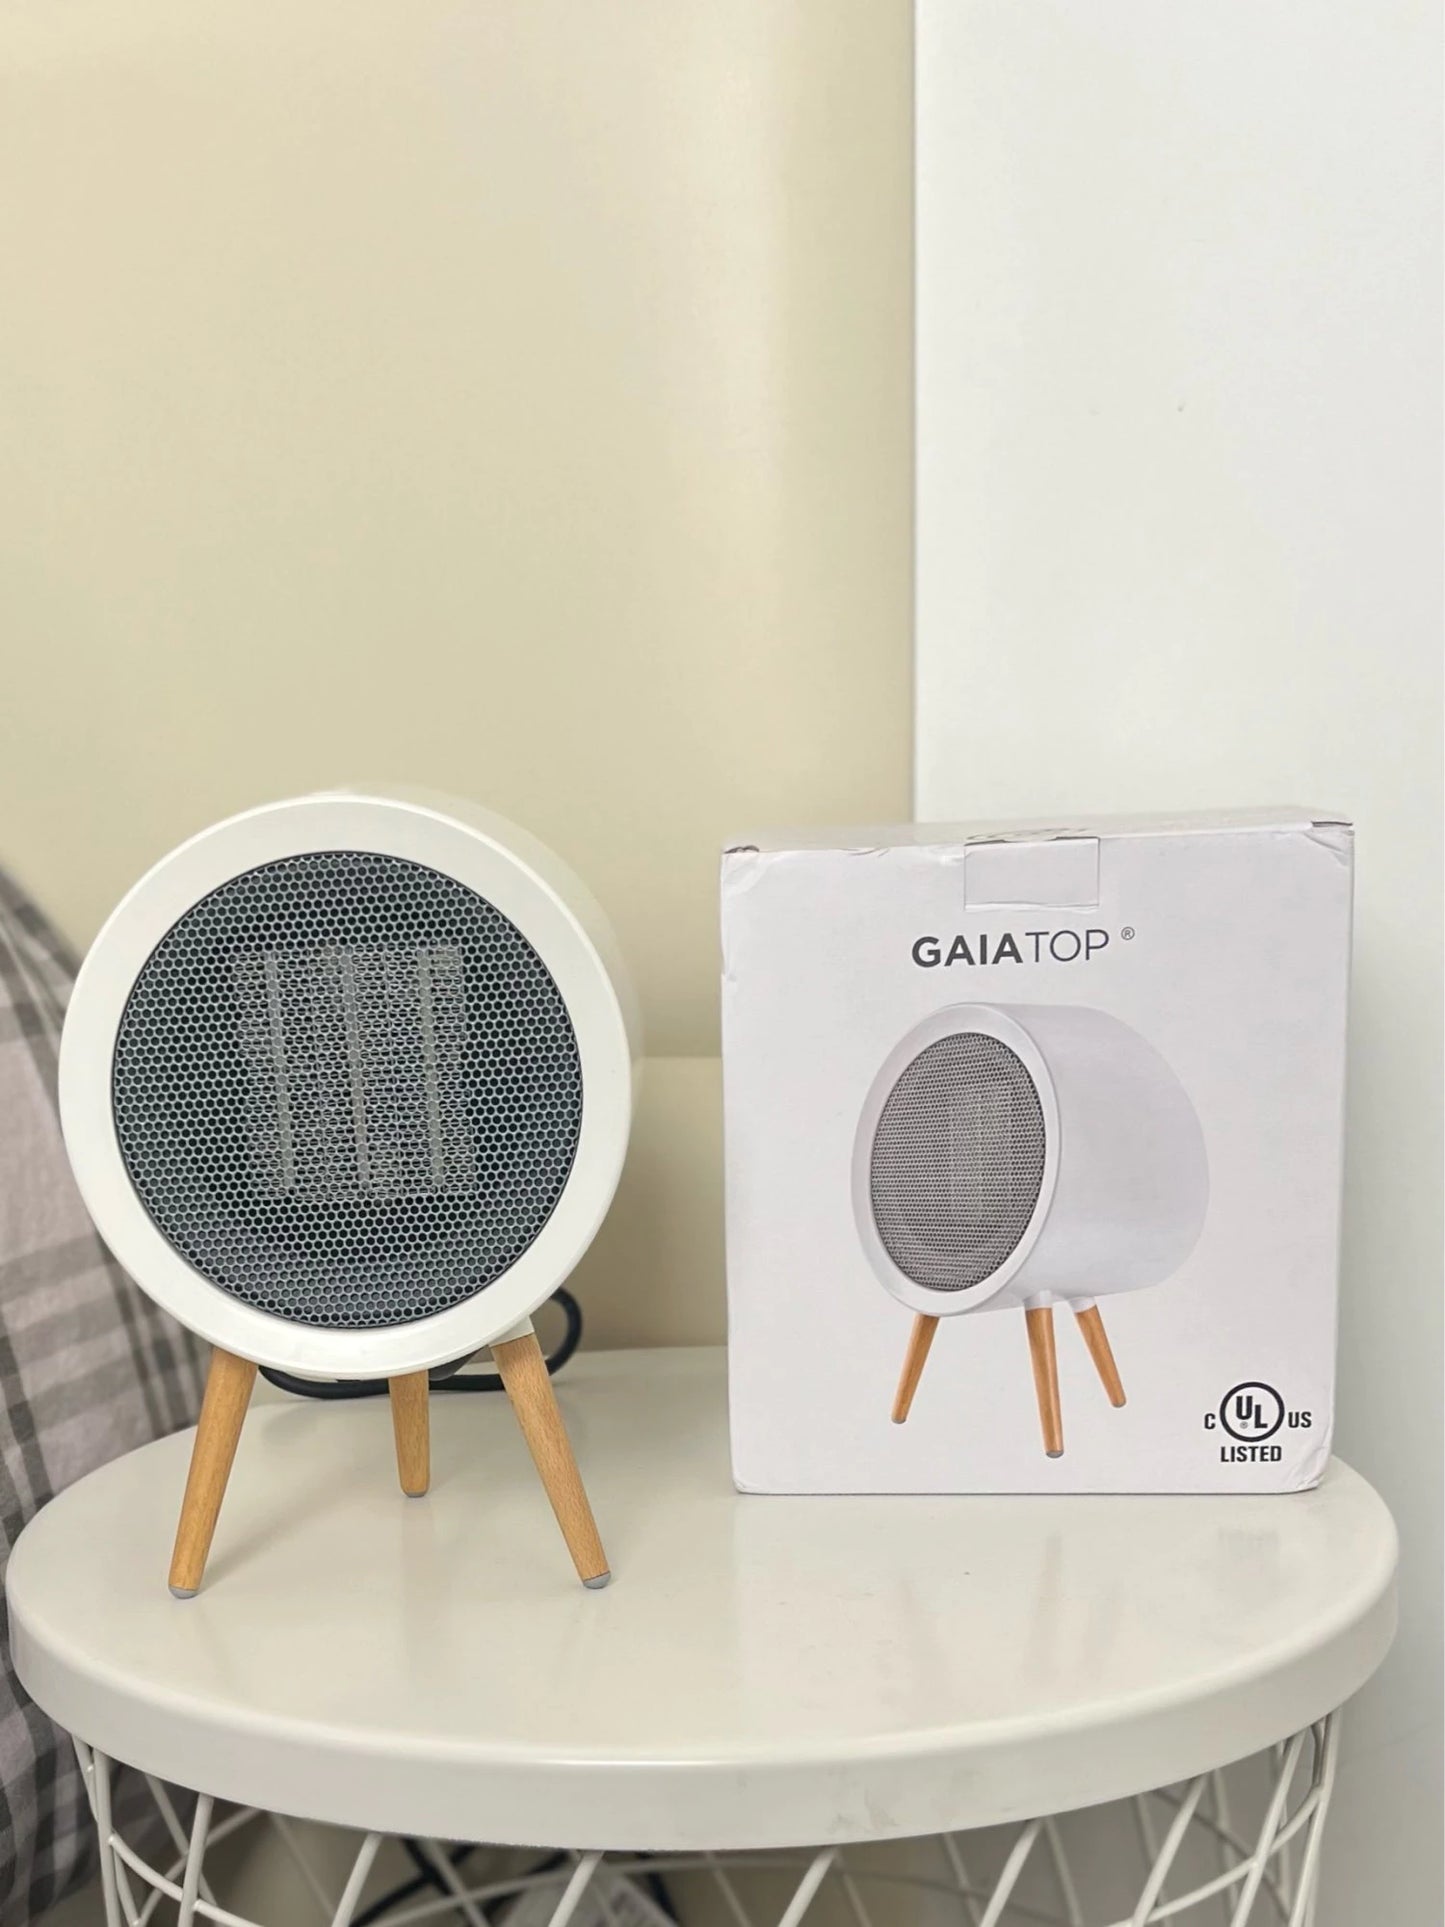 GAIATOP Small Portable Space Heater Energy Efficient Office Bedroom Home